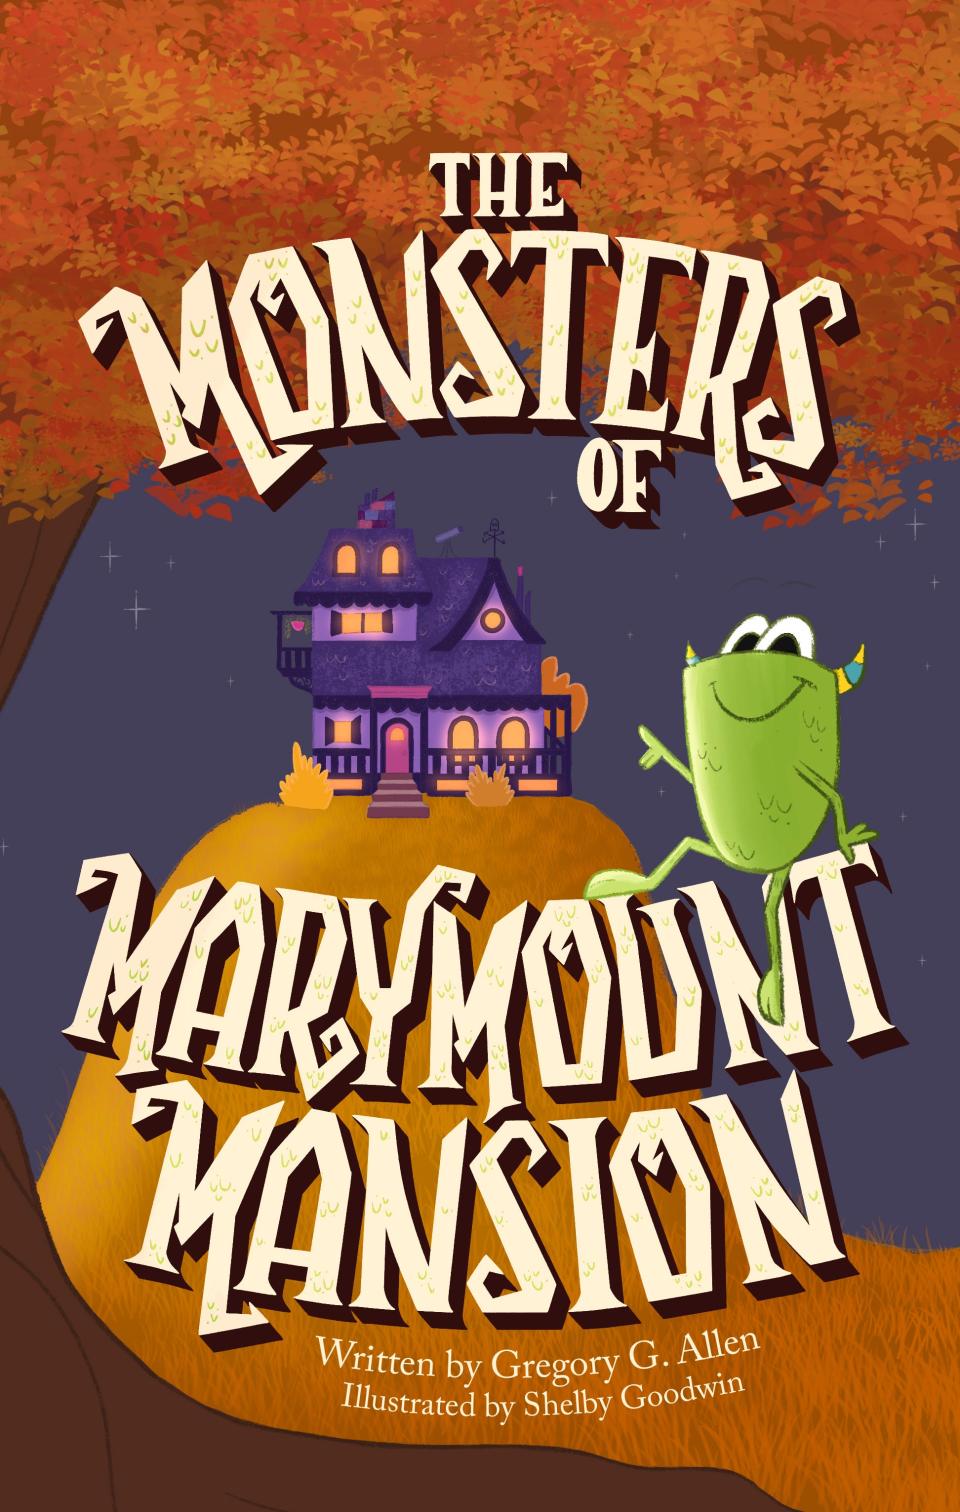 Cover of 'The Monsters of Marymount Mansion,' by Gregory G. Allen.